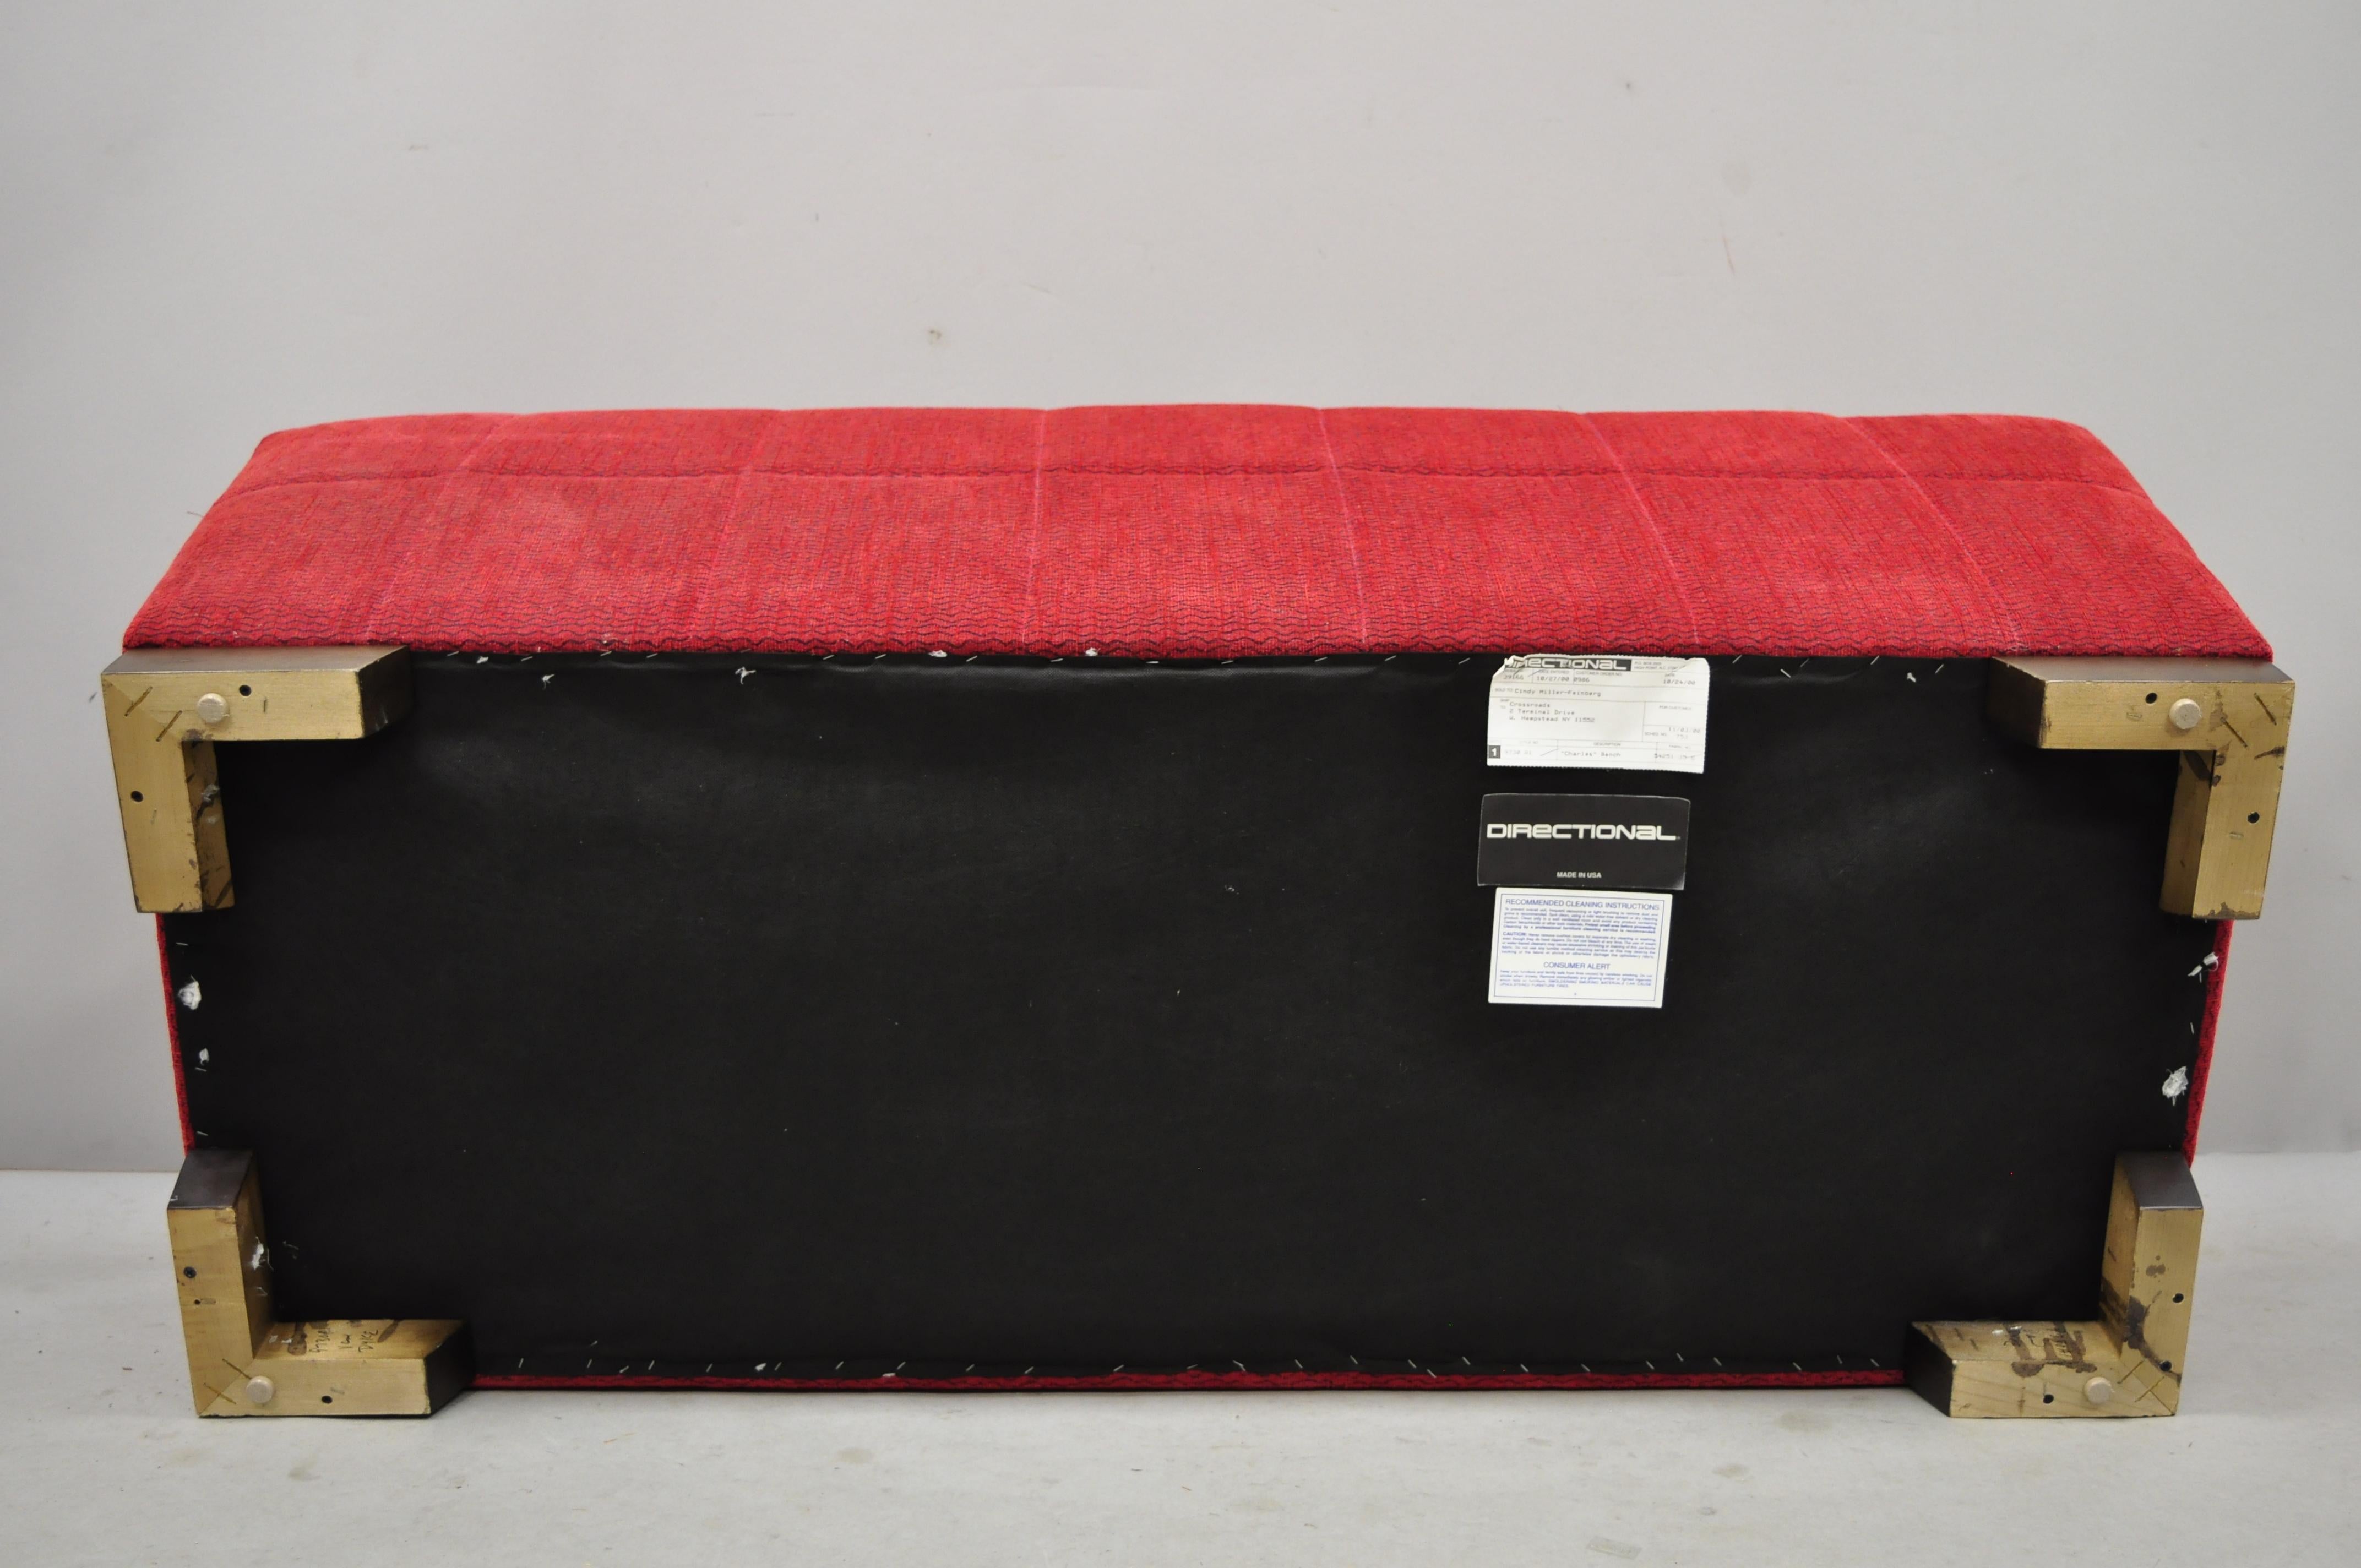 Fabric Directional Red Upholstered Large Modern Charles Bench Seat Ottoman For Sale